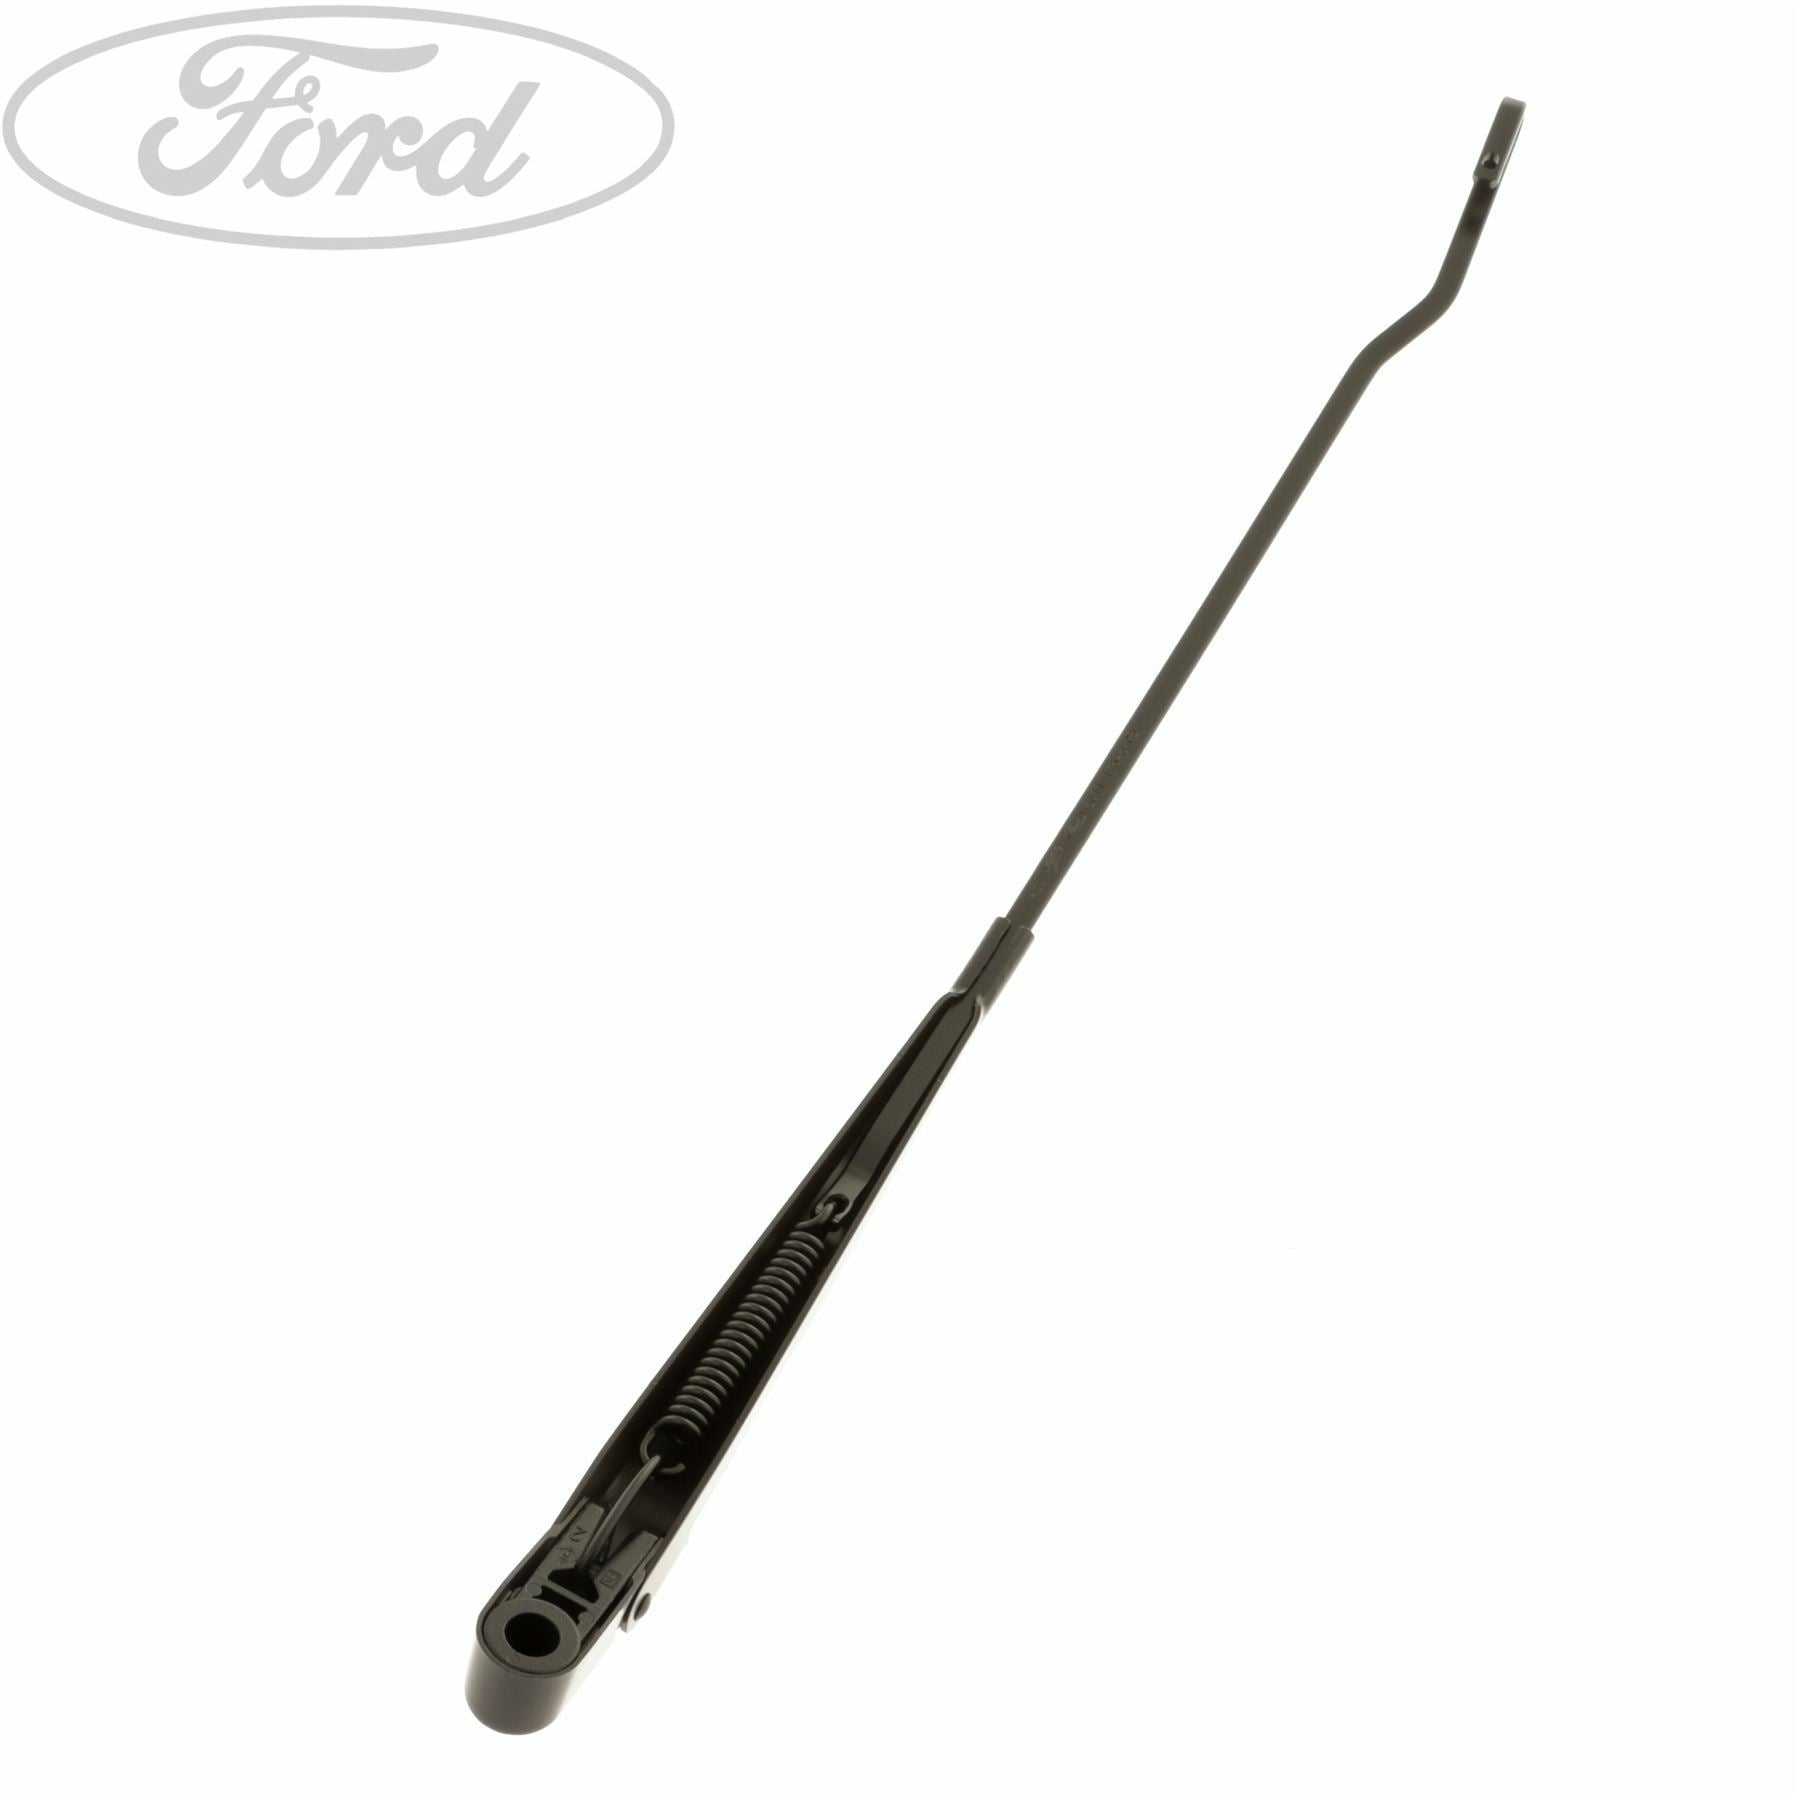 Ford, TRANSIT FRONT N/S WIPER ARM